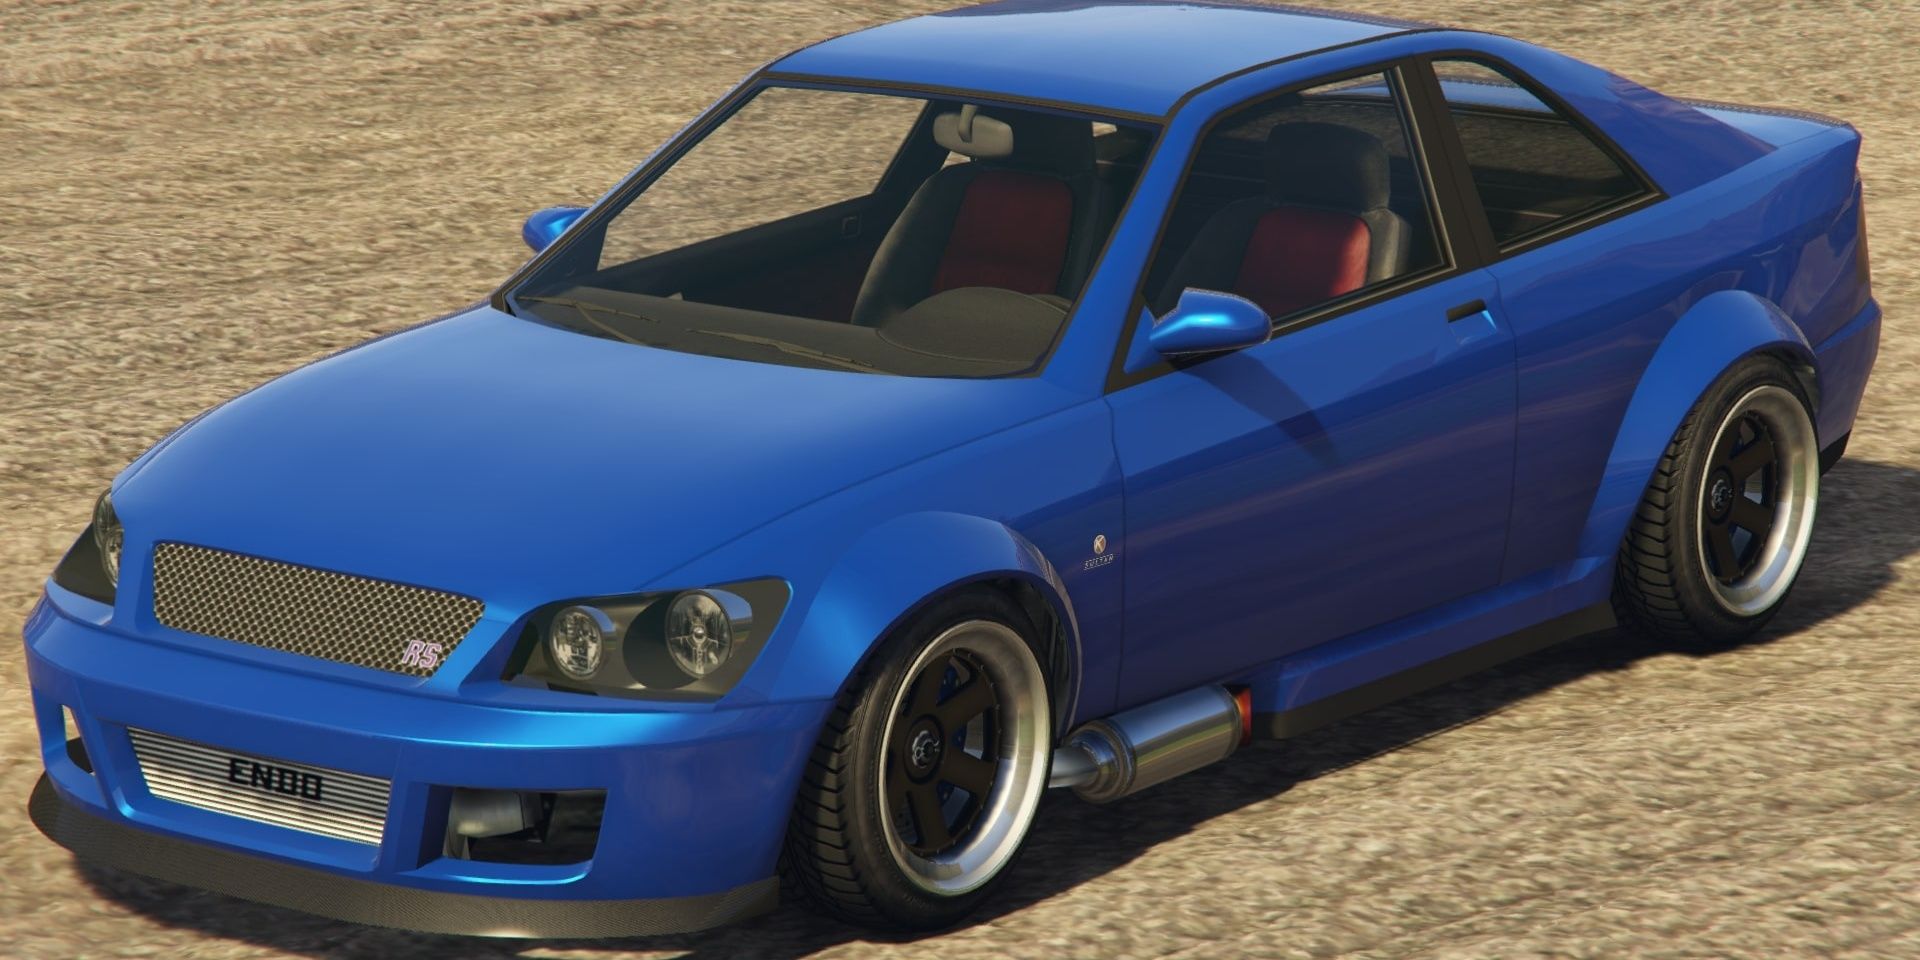 GTA 5 Sultan RS car parked